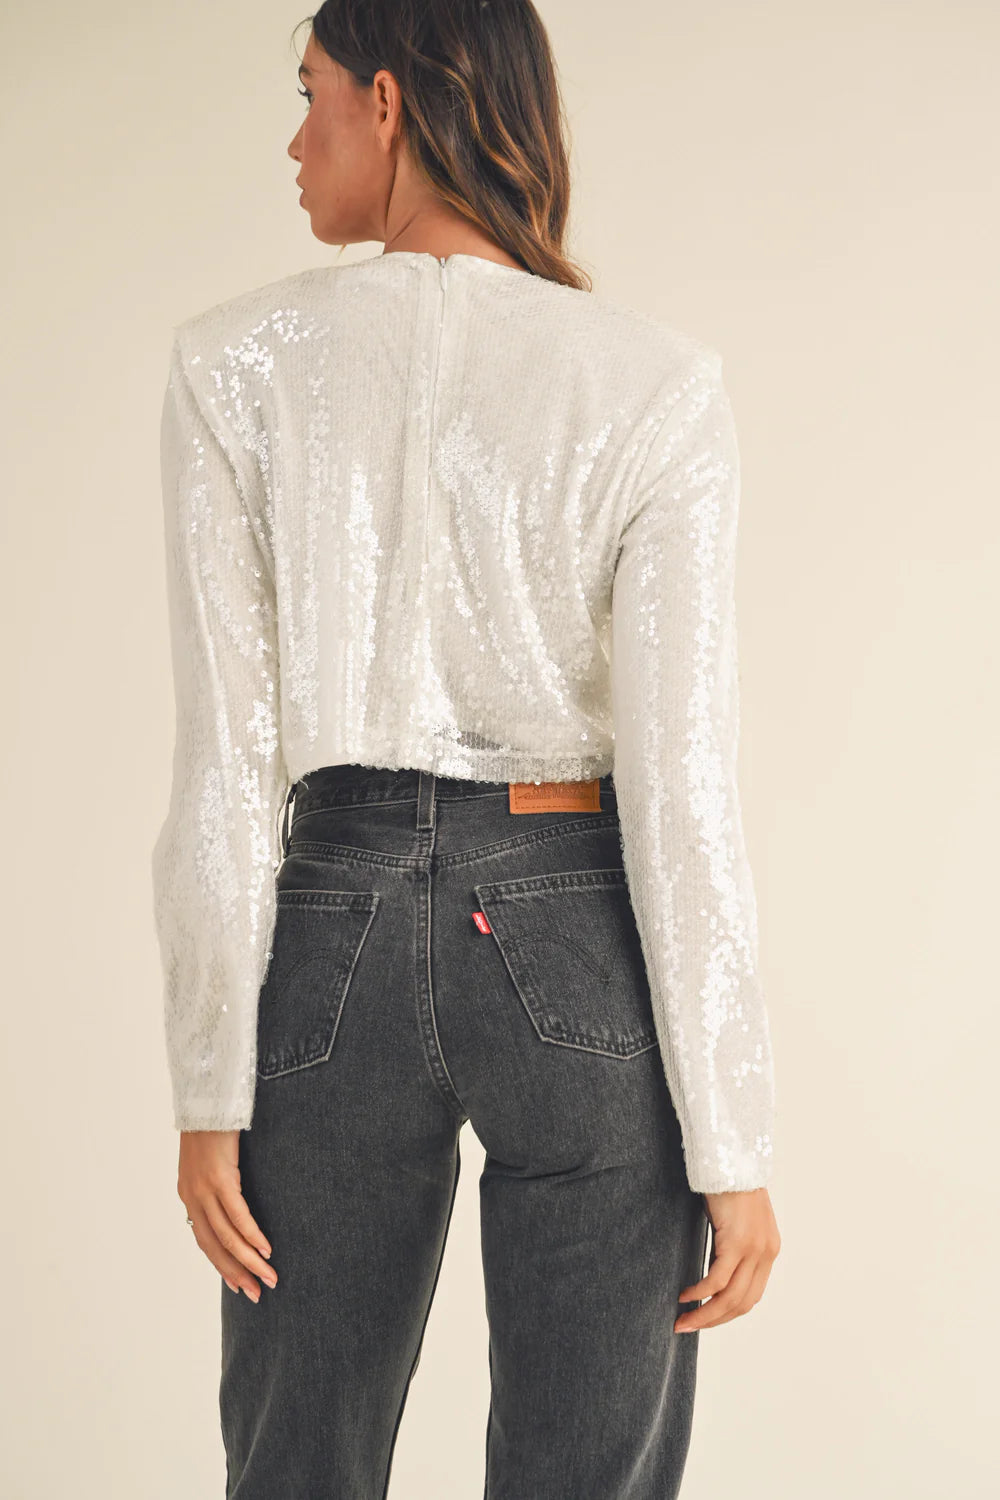 Off White Fenna Shoulder Padded Sequin Crop Top | Collective Request 